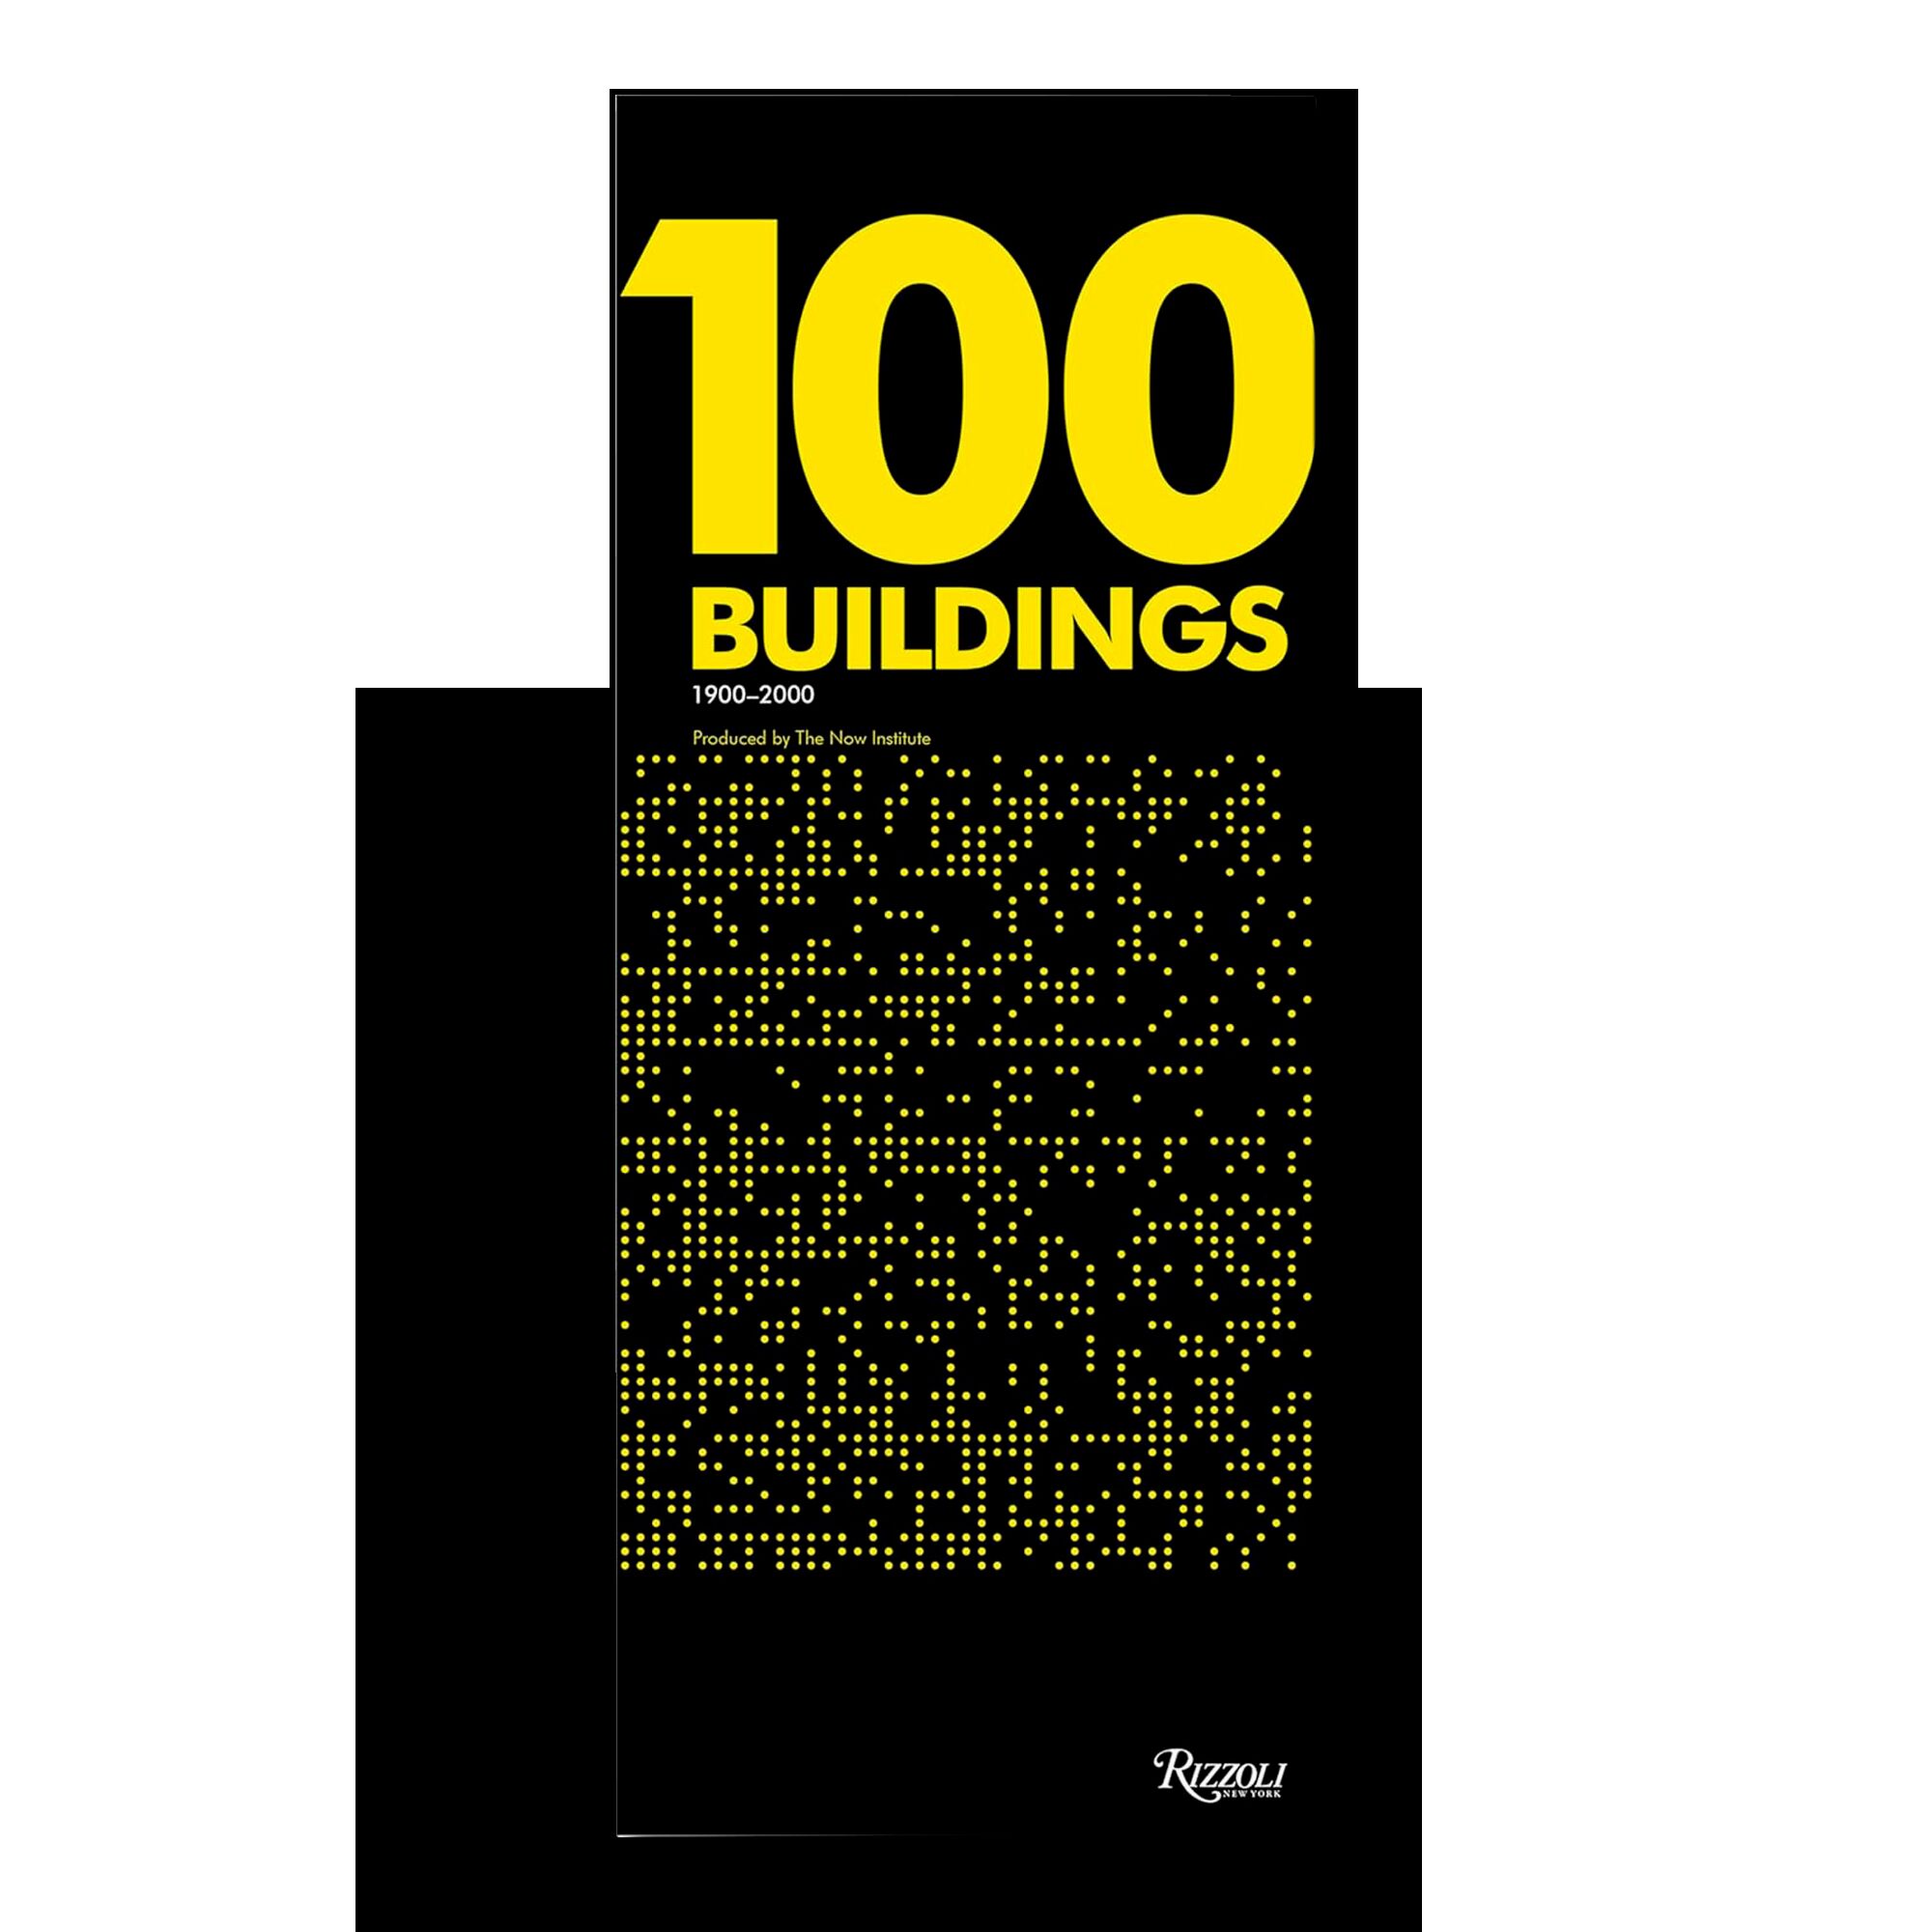 100 Buildings: 1900-2000 · Produced by The Now Institute